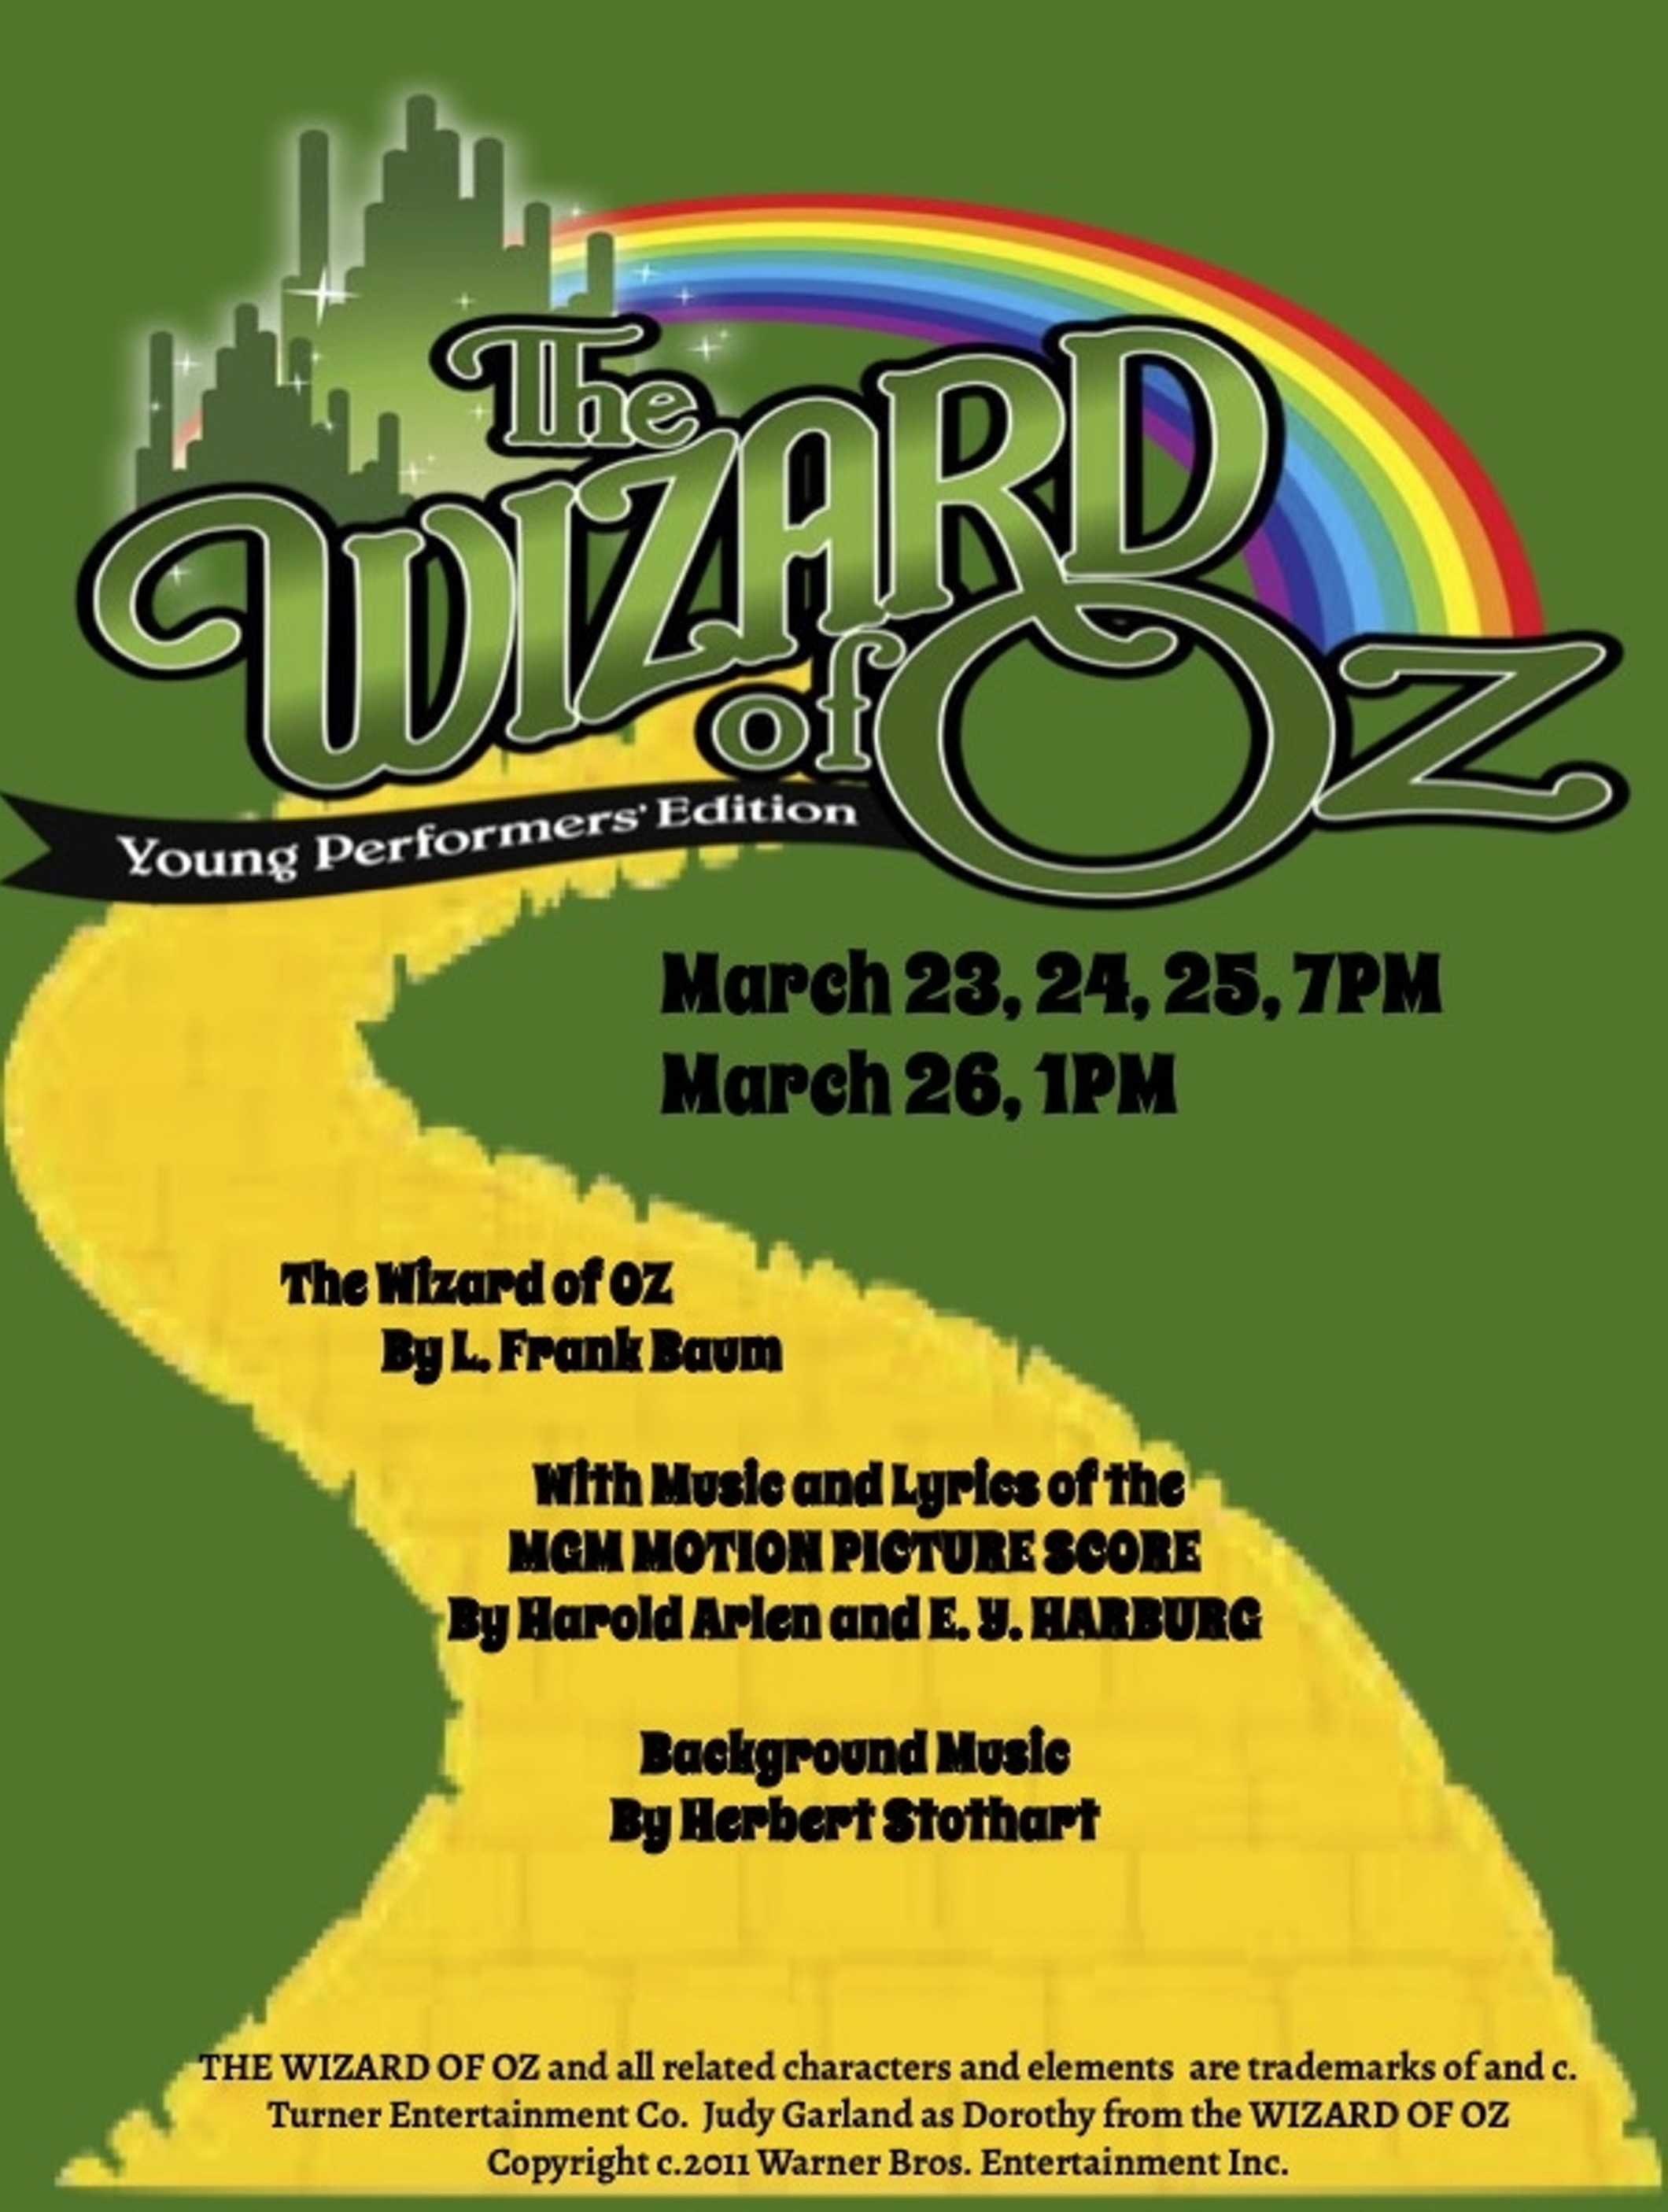 The Wizard of Oz (Young Performers' Edition) at Philadelphia Academy